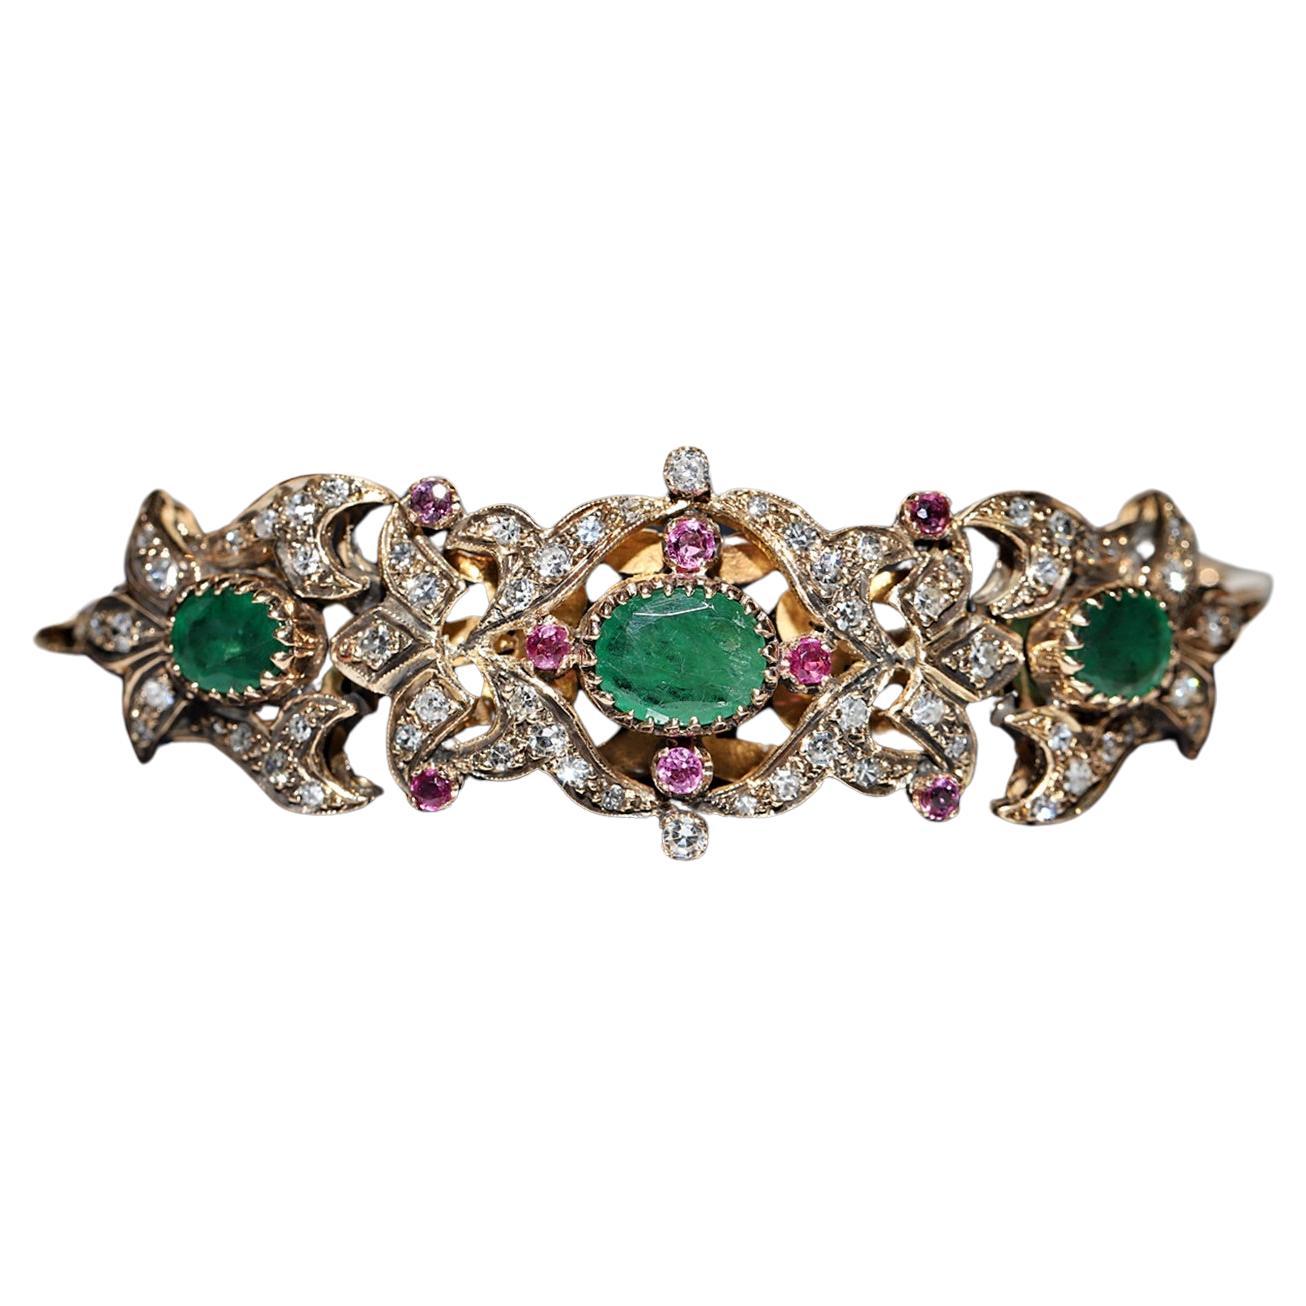 Vintage Circa 1960s 14k Gold Natural Diamond And Emerald And Ruby Bracelet For Sale